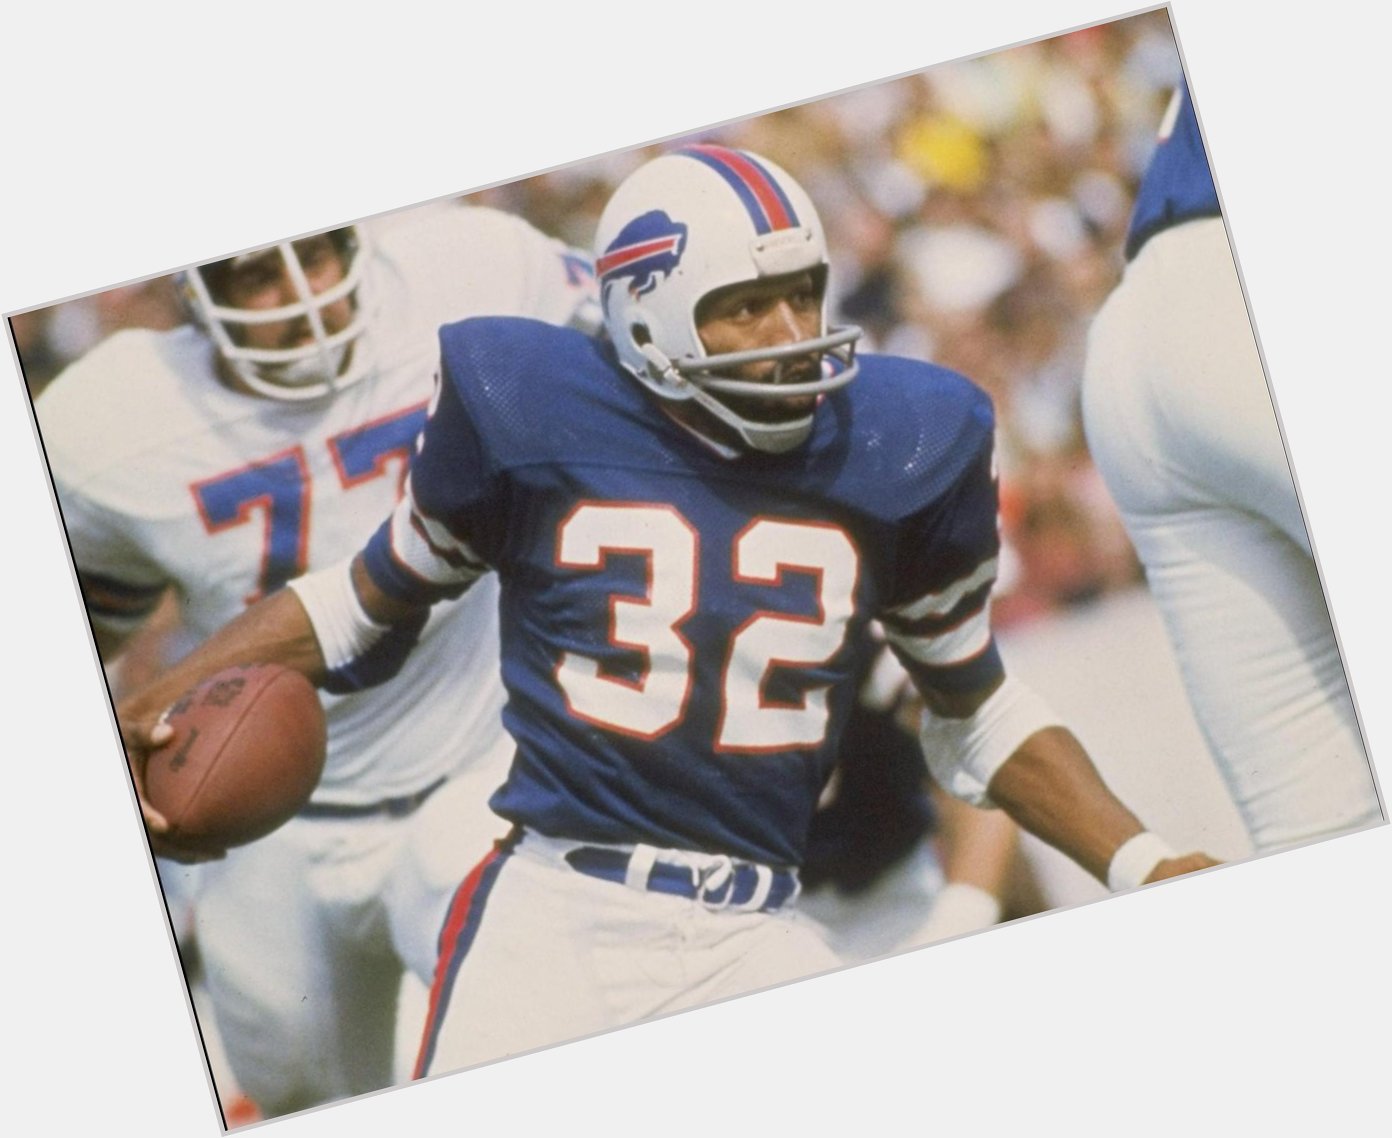 Happy BDay to our lifetime member and Hall of Famer O. J. Simpson! 